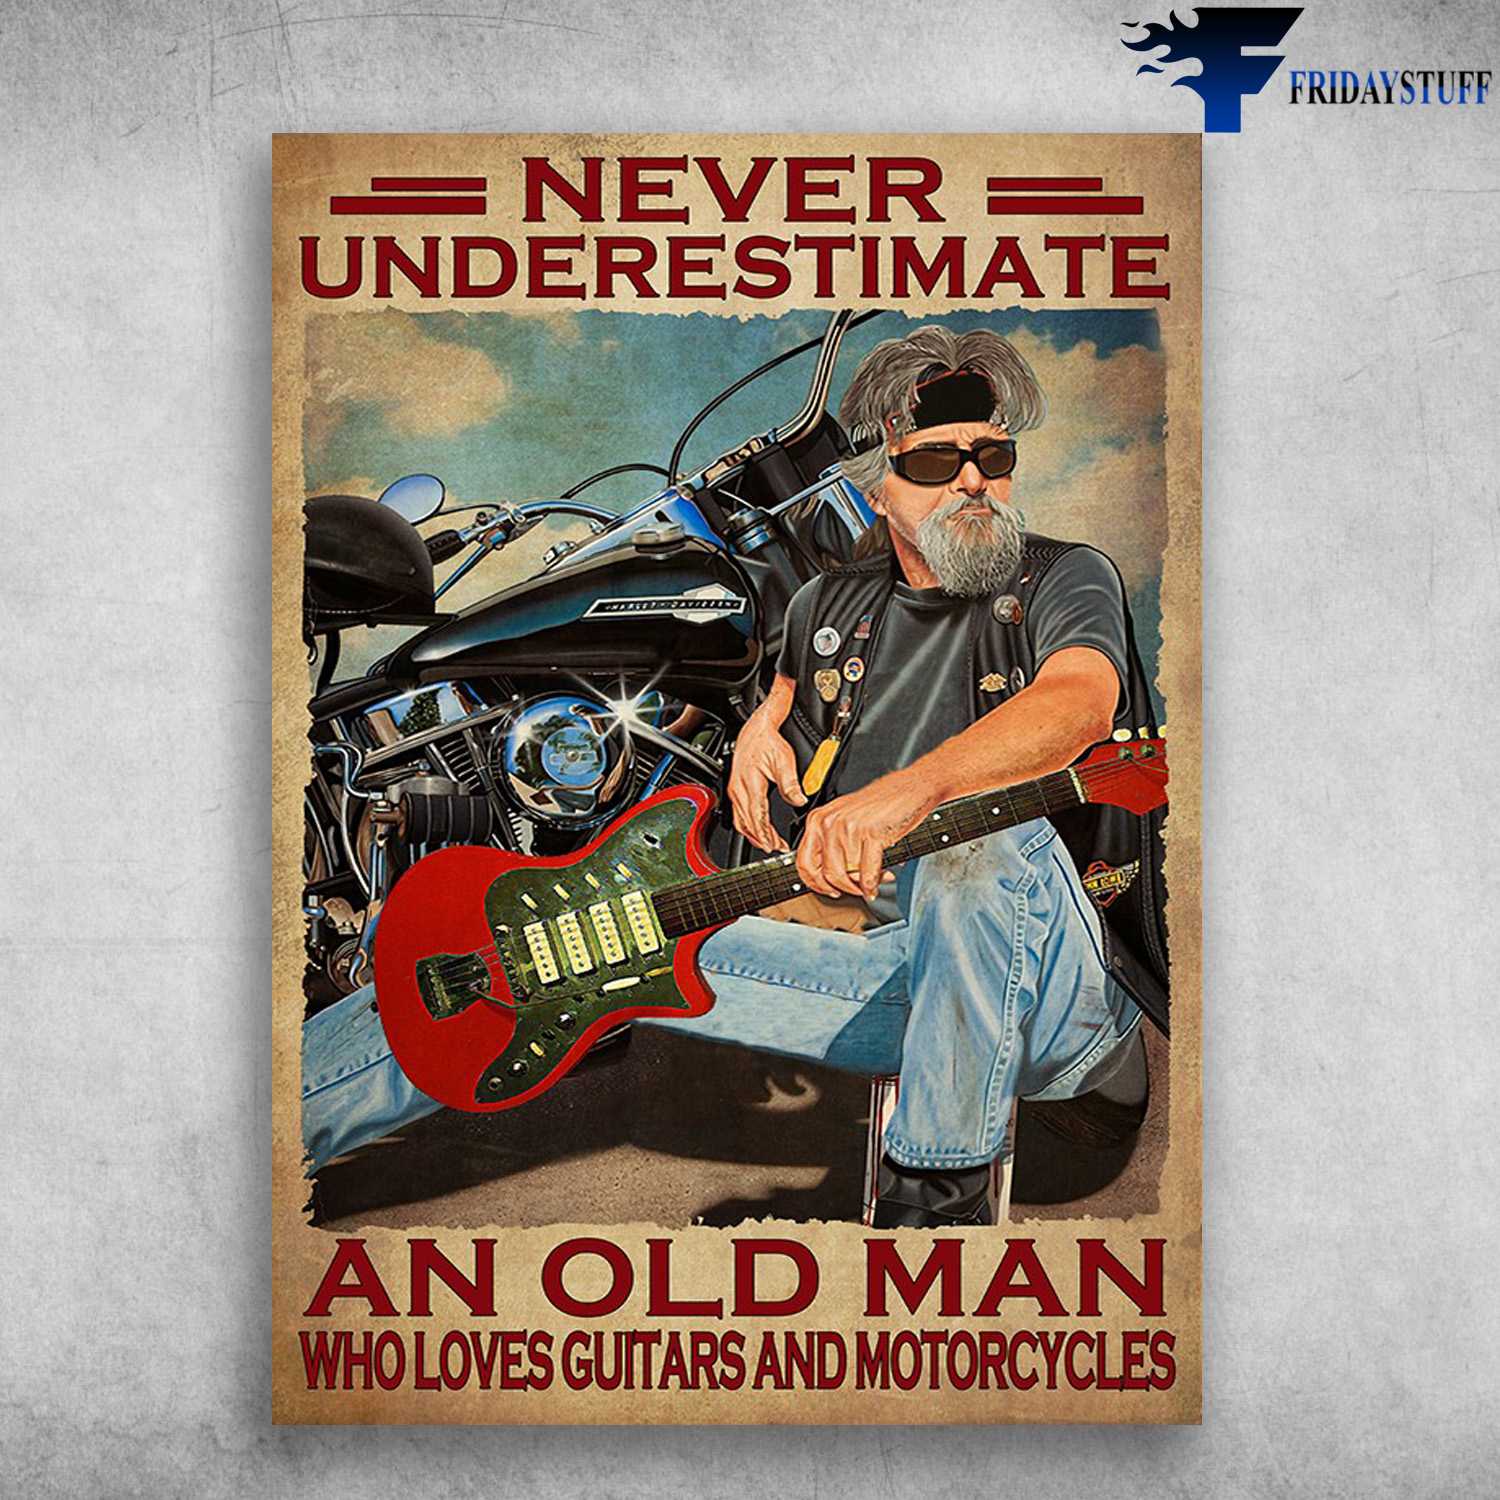 Motorcycle And Electric Guitar - Never Underestimate An Old Man, Who Loves Guitars And Motorcycles